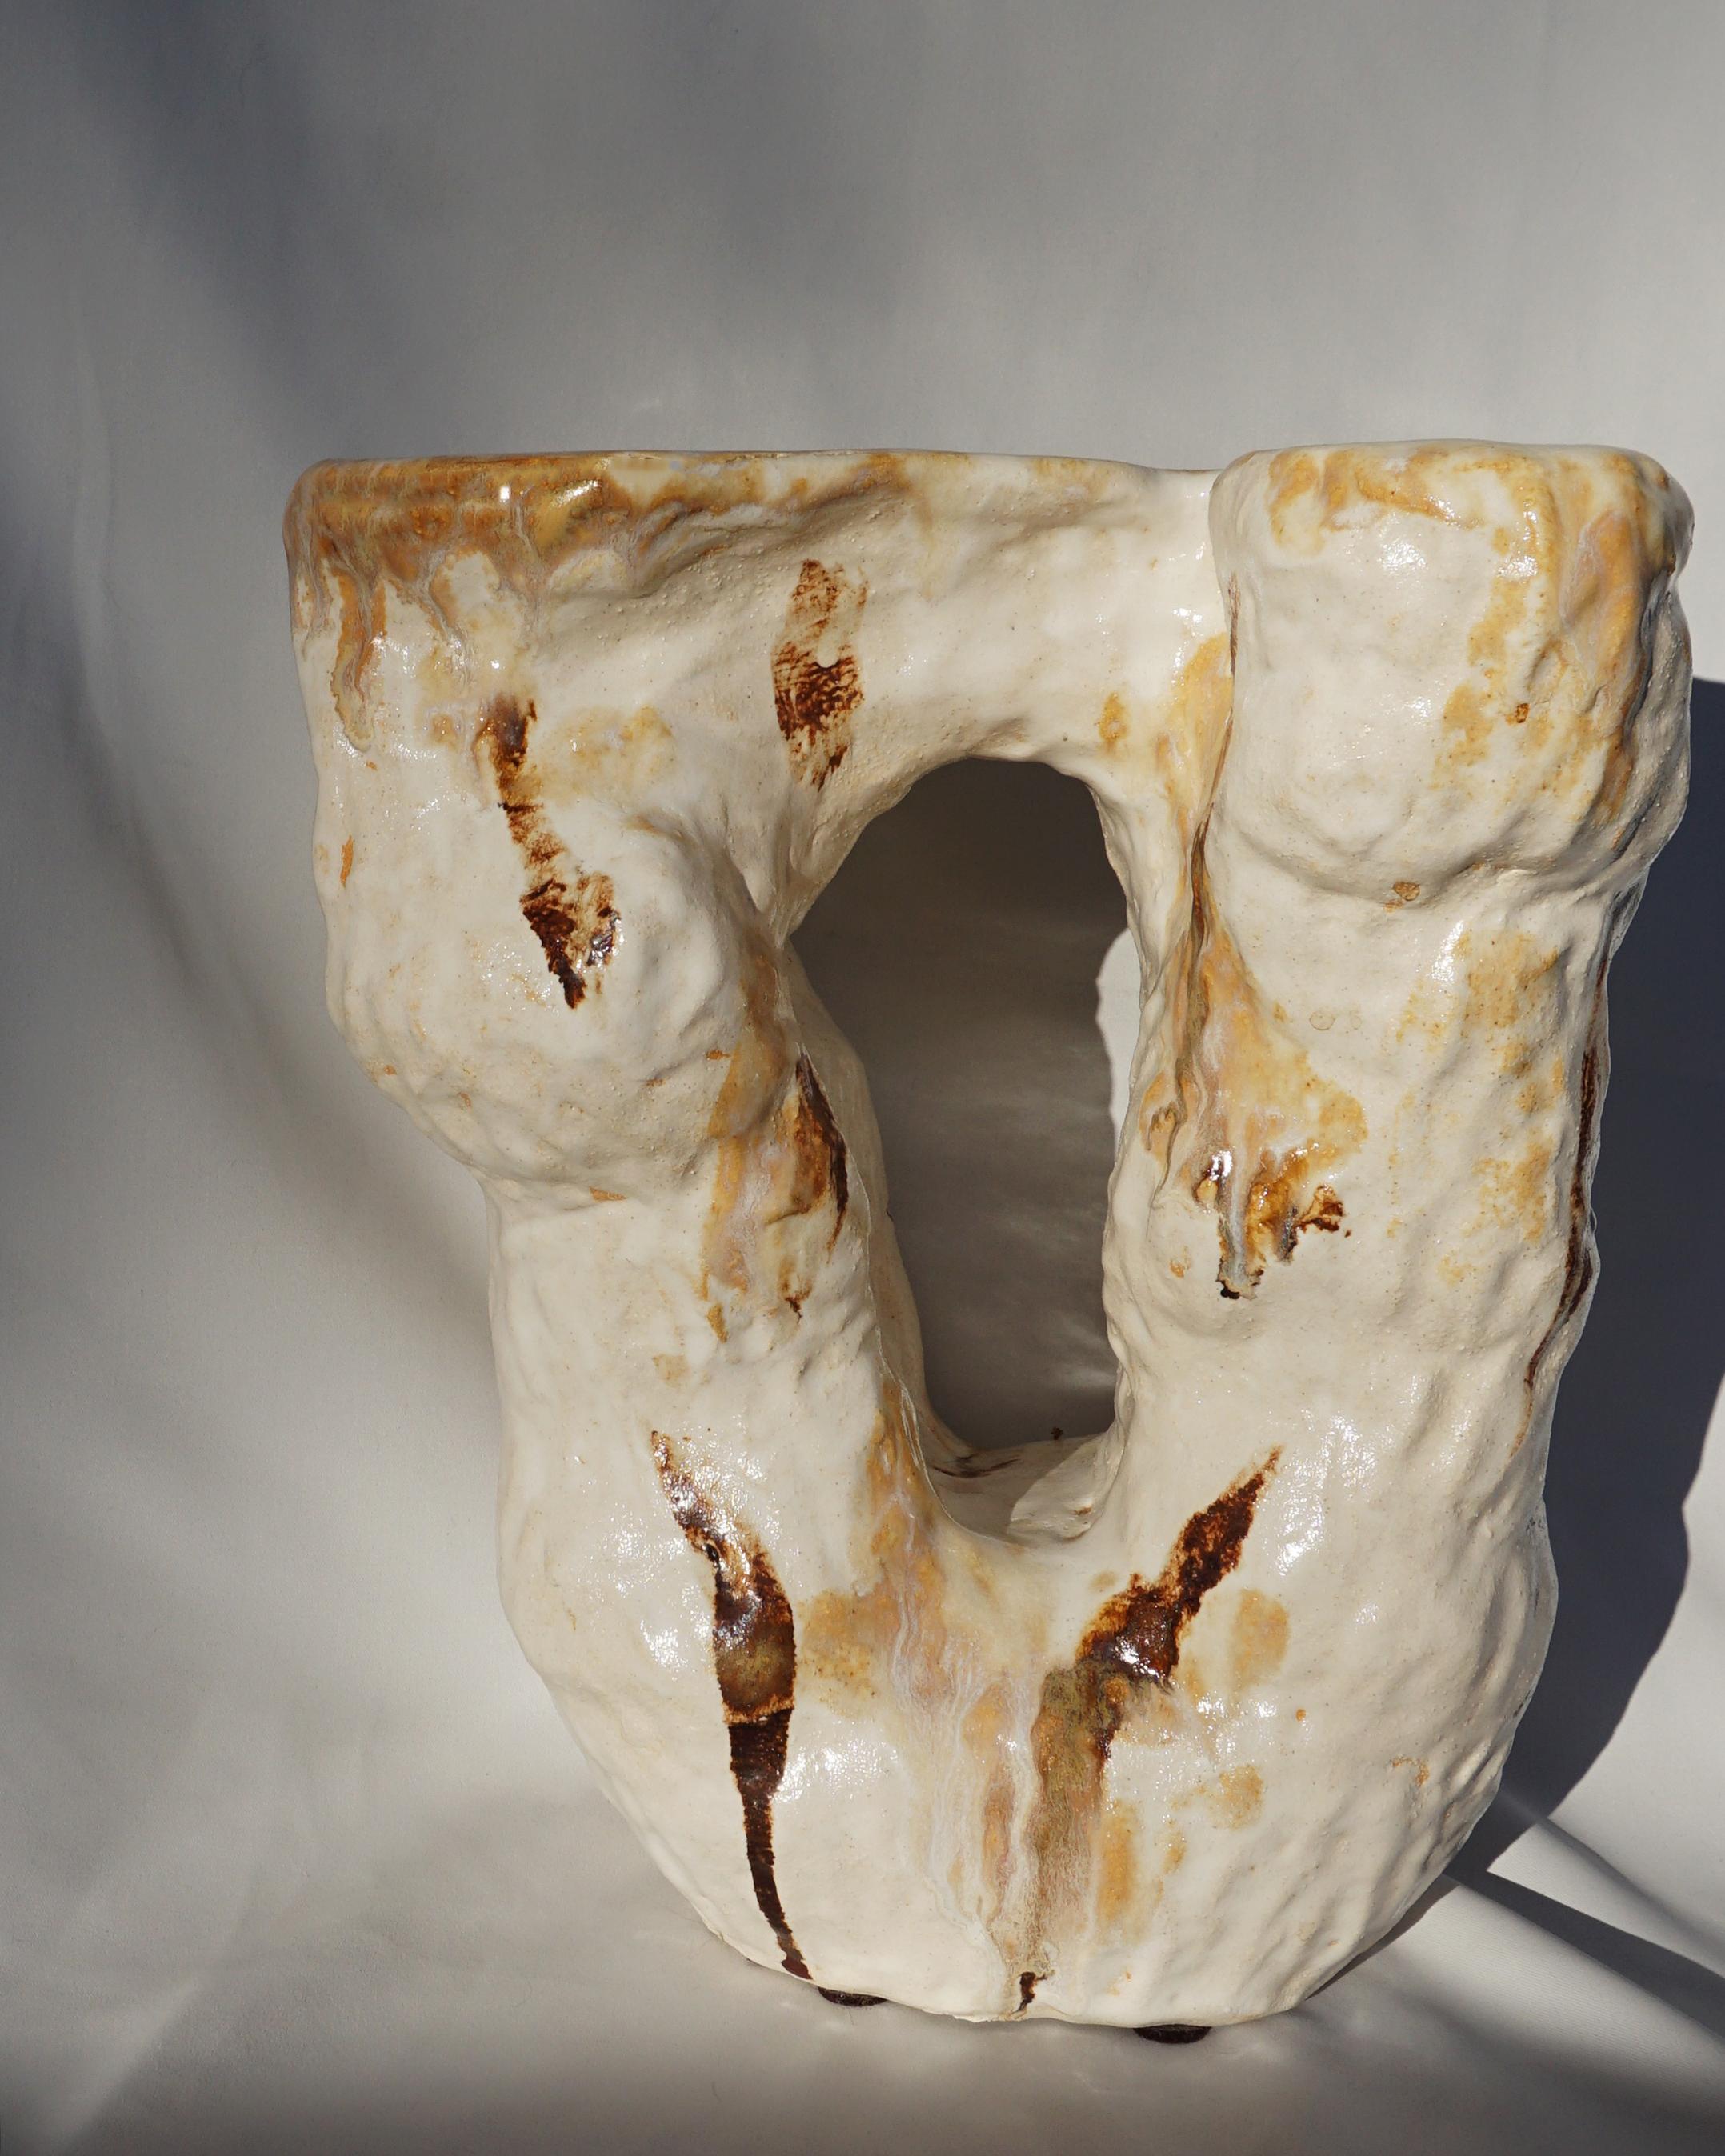 Unique MOSI sculptural sidetable by Marthine Spinnangr
One of a Kind
Dimensions: D 28 x W 24 x H 48 cm
Materials: Ceramic
Different glaze types available

MOSI is inspired by a morf sketch process inspired by nature walks and human poses to